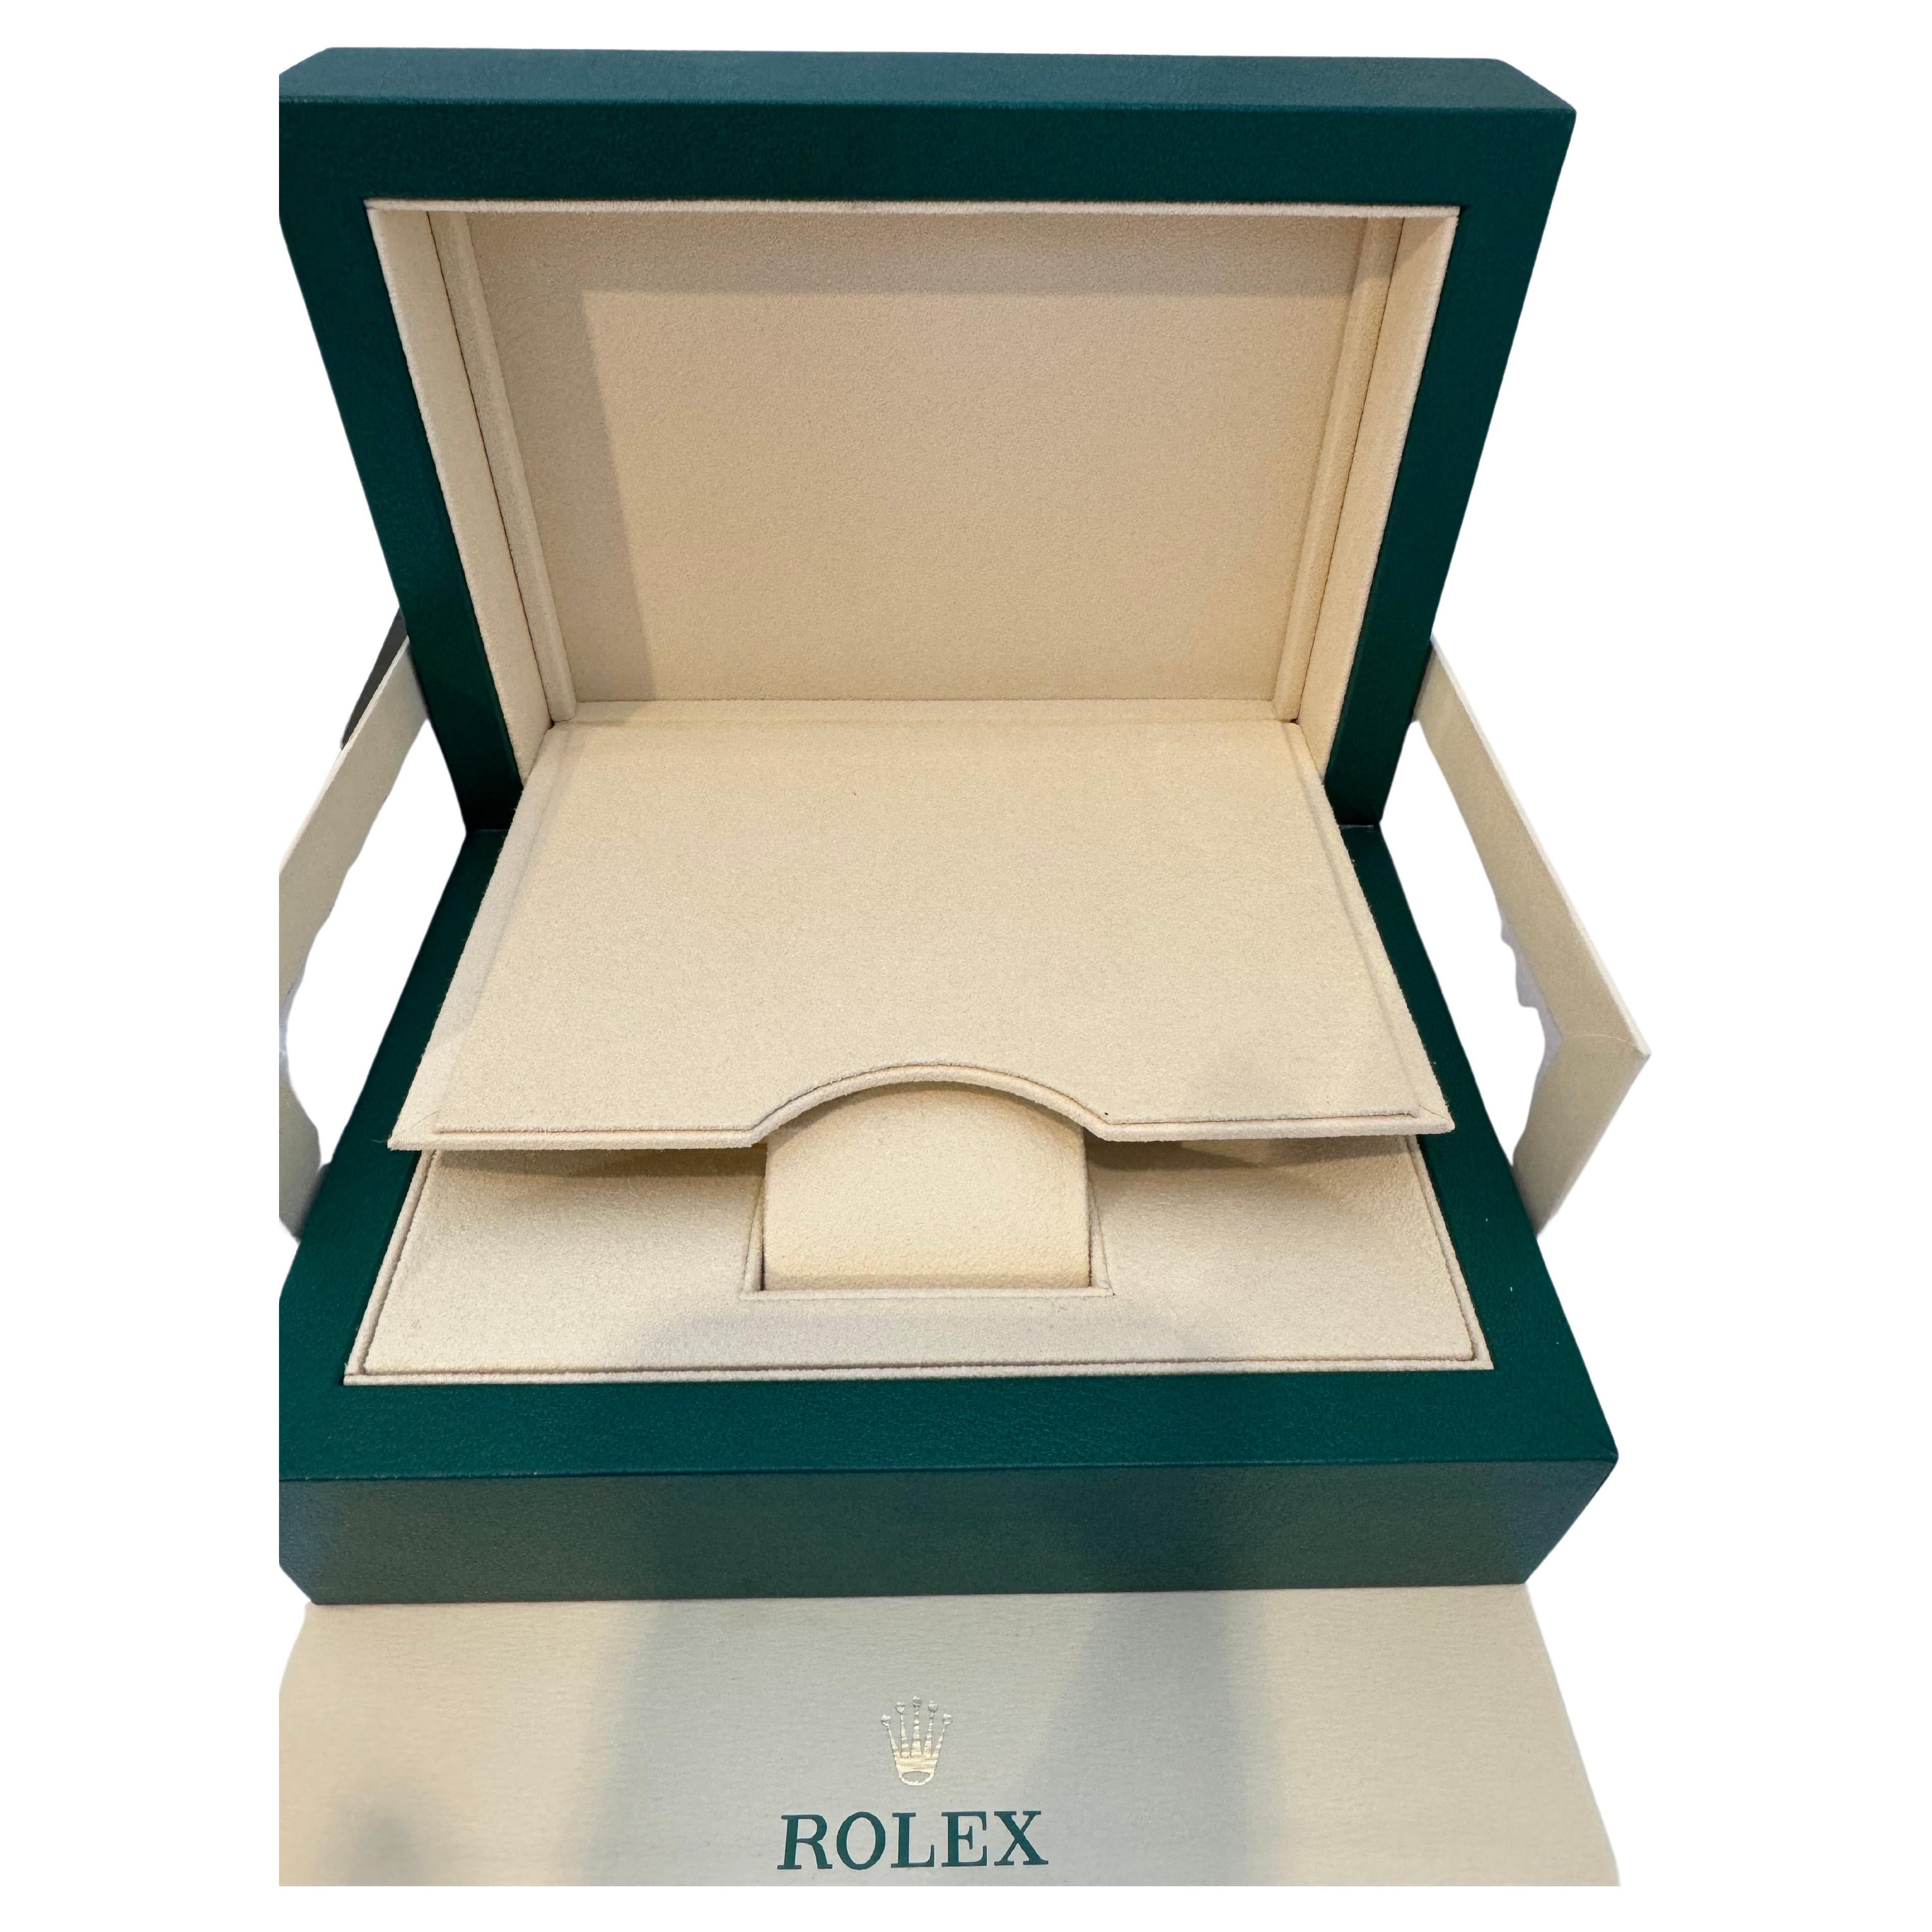 Brand New Watch BOX 
 Rolex was  purchased from show room in Manhattan 
 Watch was used for personal use and i am selling the box

Large Brand New Rolex Box
Complete and new Rolex box.
With booklet and warranty and serial # of watch 
Large size